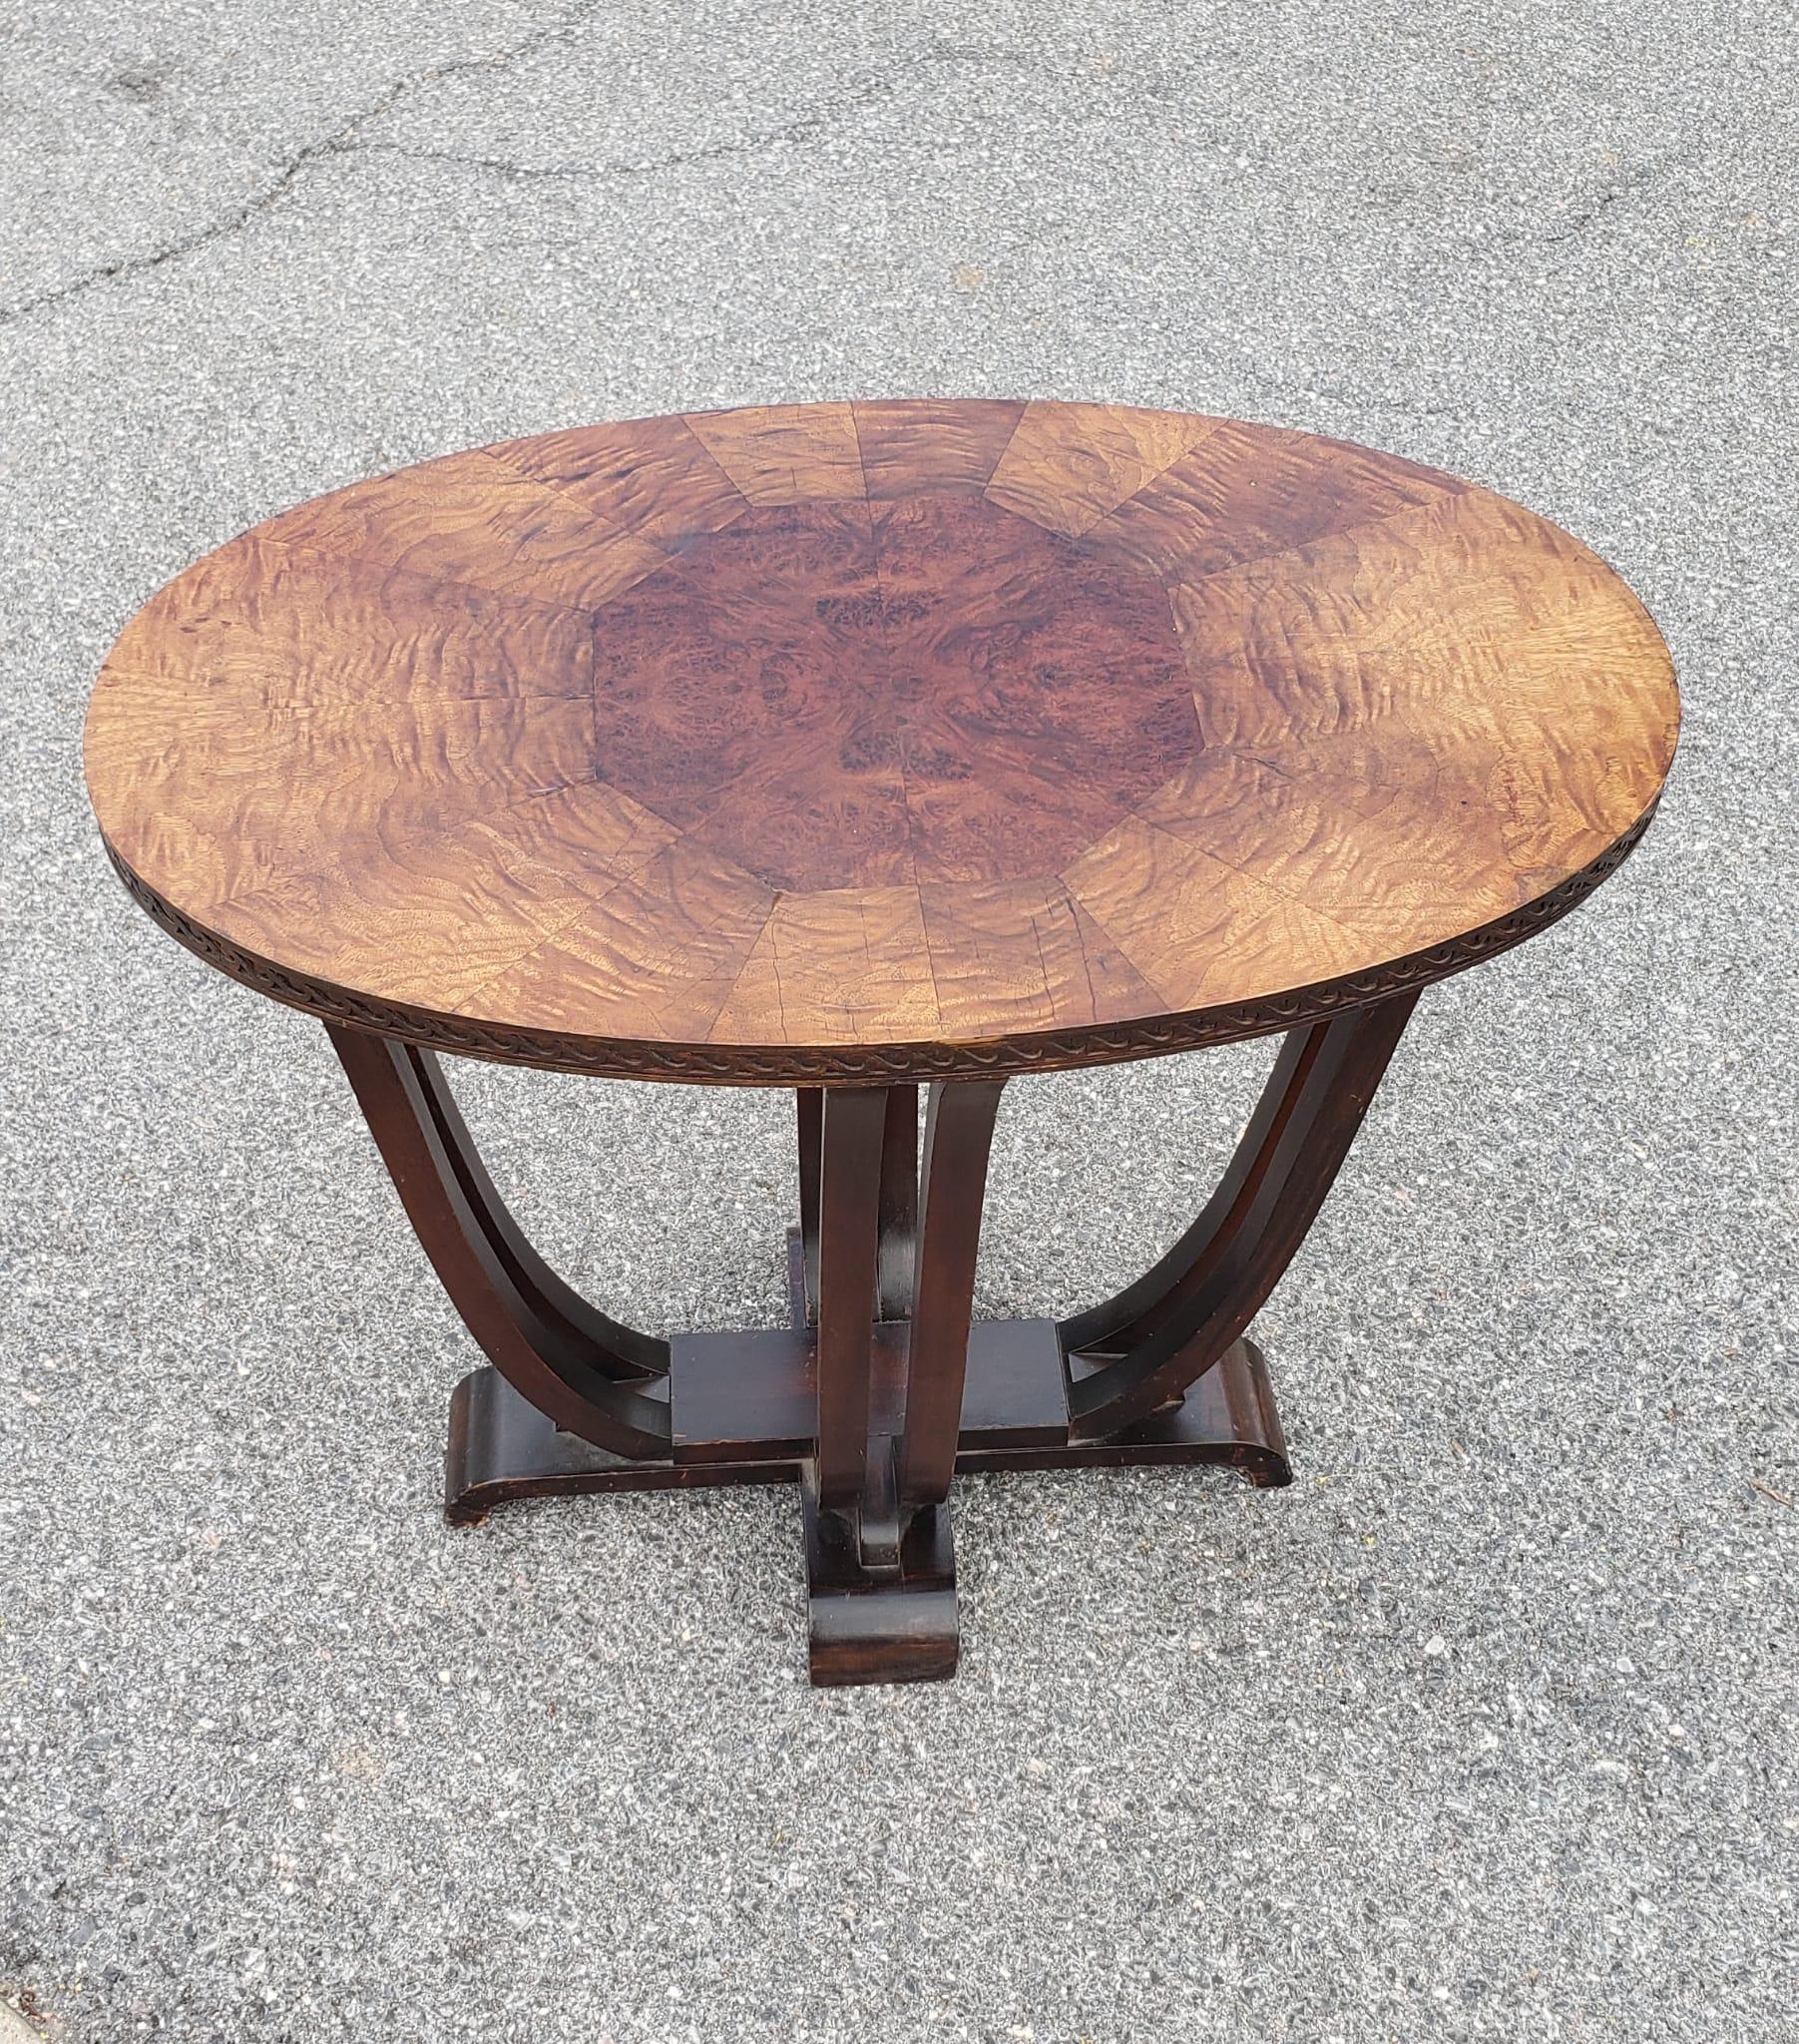 Early 20th century Burl Walnut Oval Center Table or Side Table. Table has been refinished down the road.
Measures 32